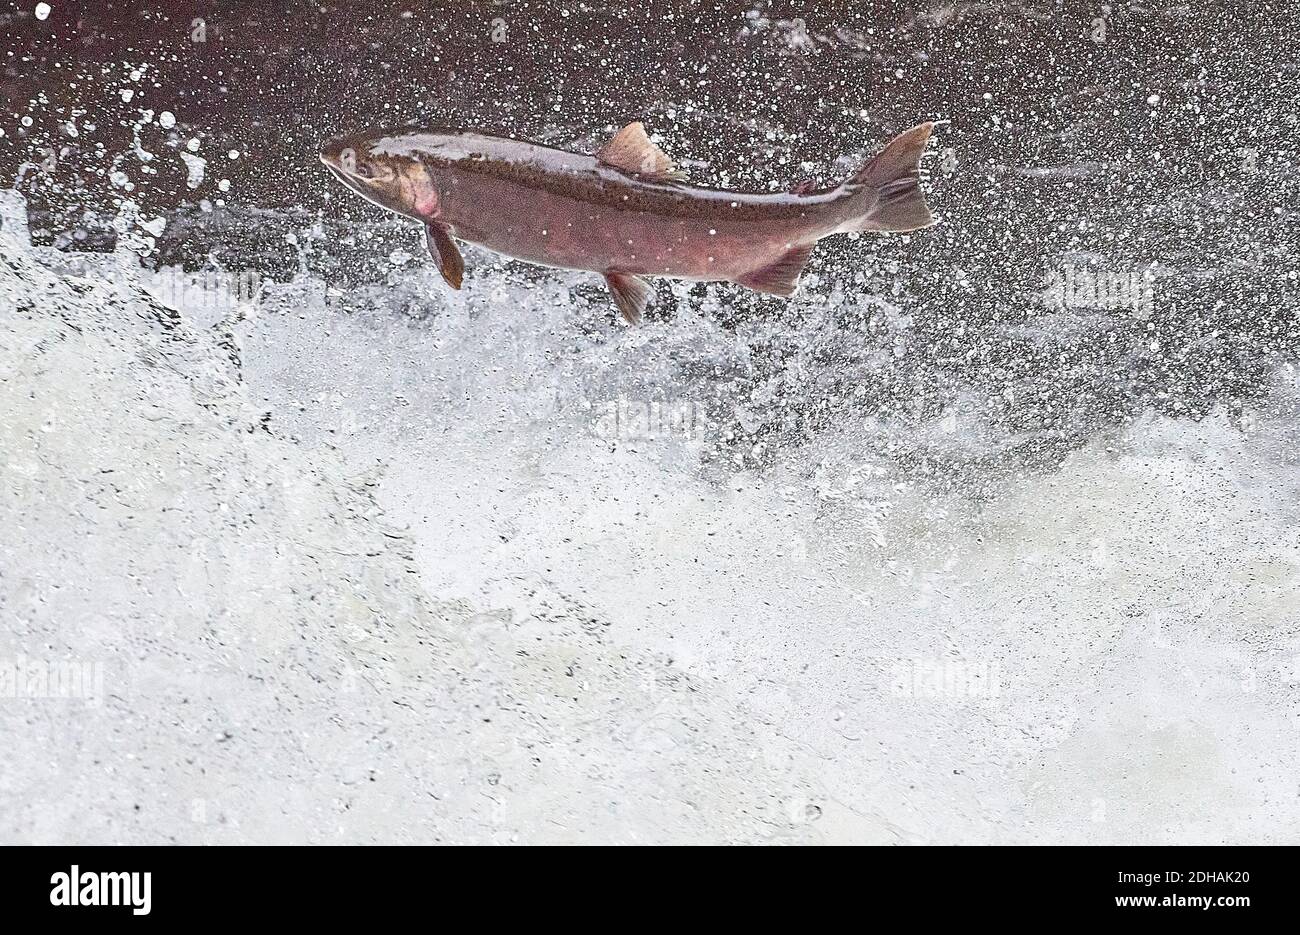 A migrating Coho salmon (Oncorhynchus kisutch) jumps up Lake Creek Falls on a tributary of the Siuslaw River in western Oregon. Stock Photo